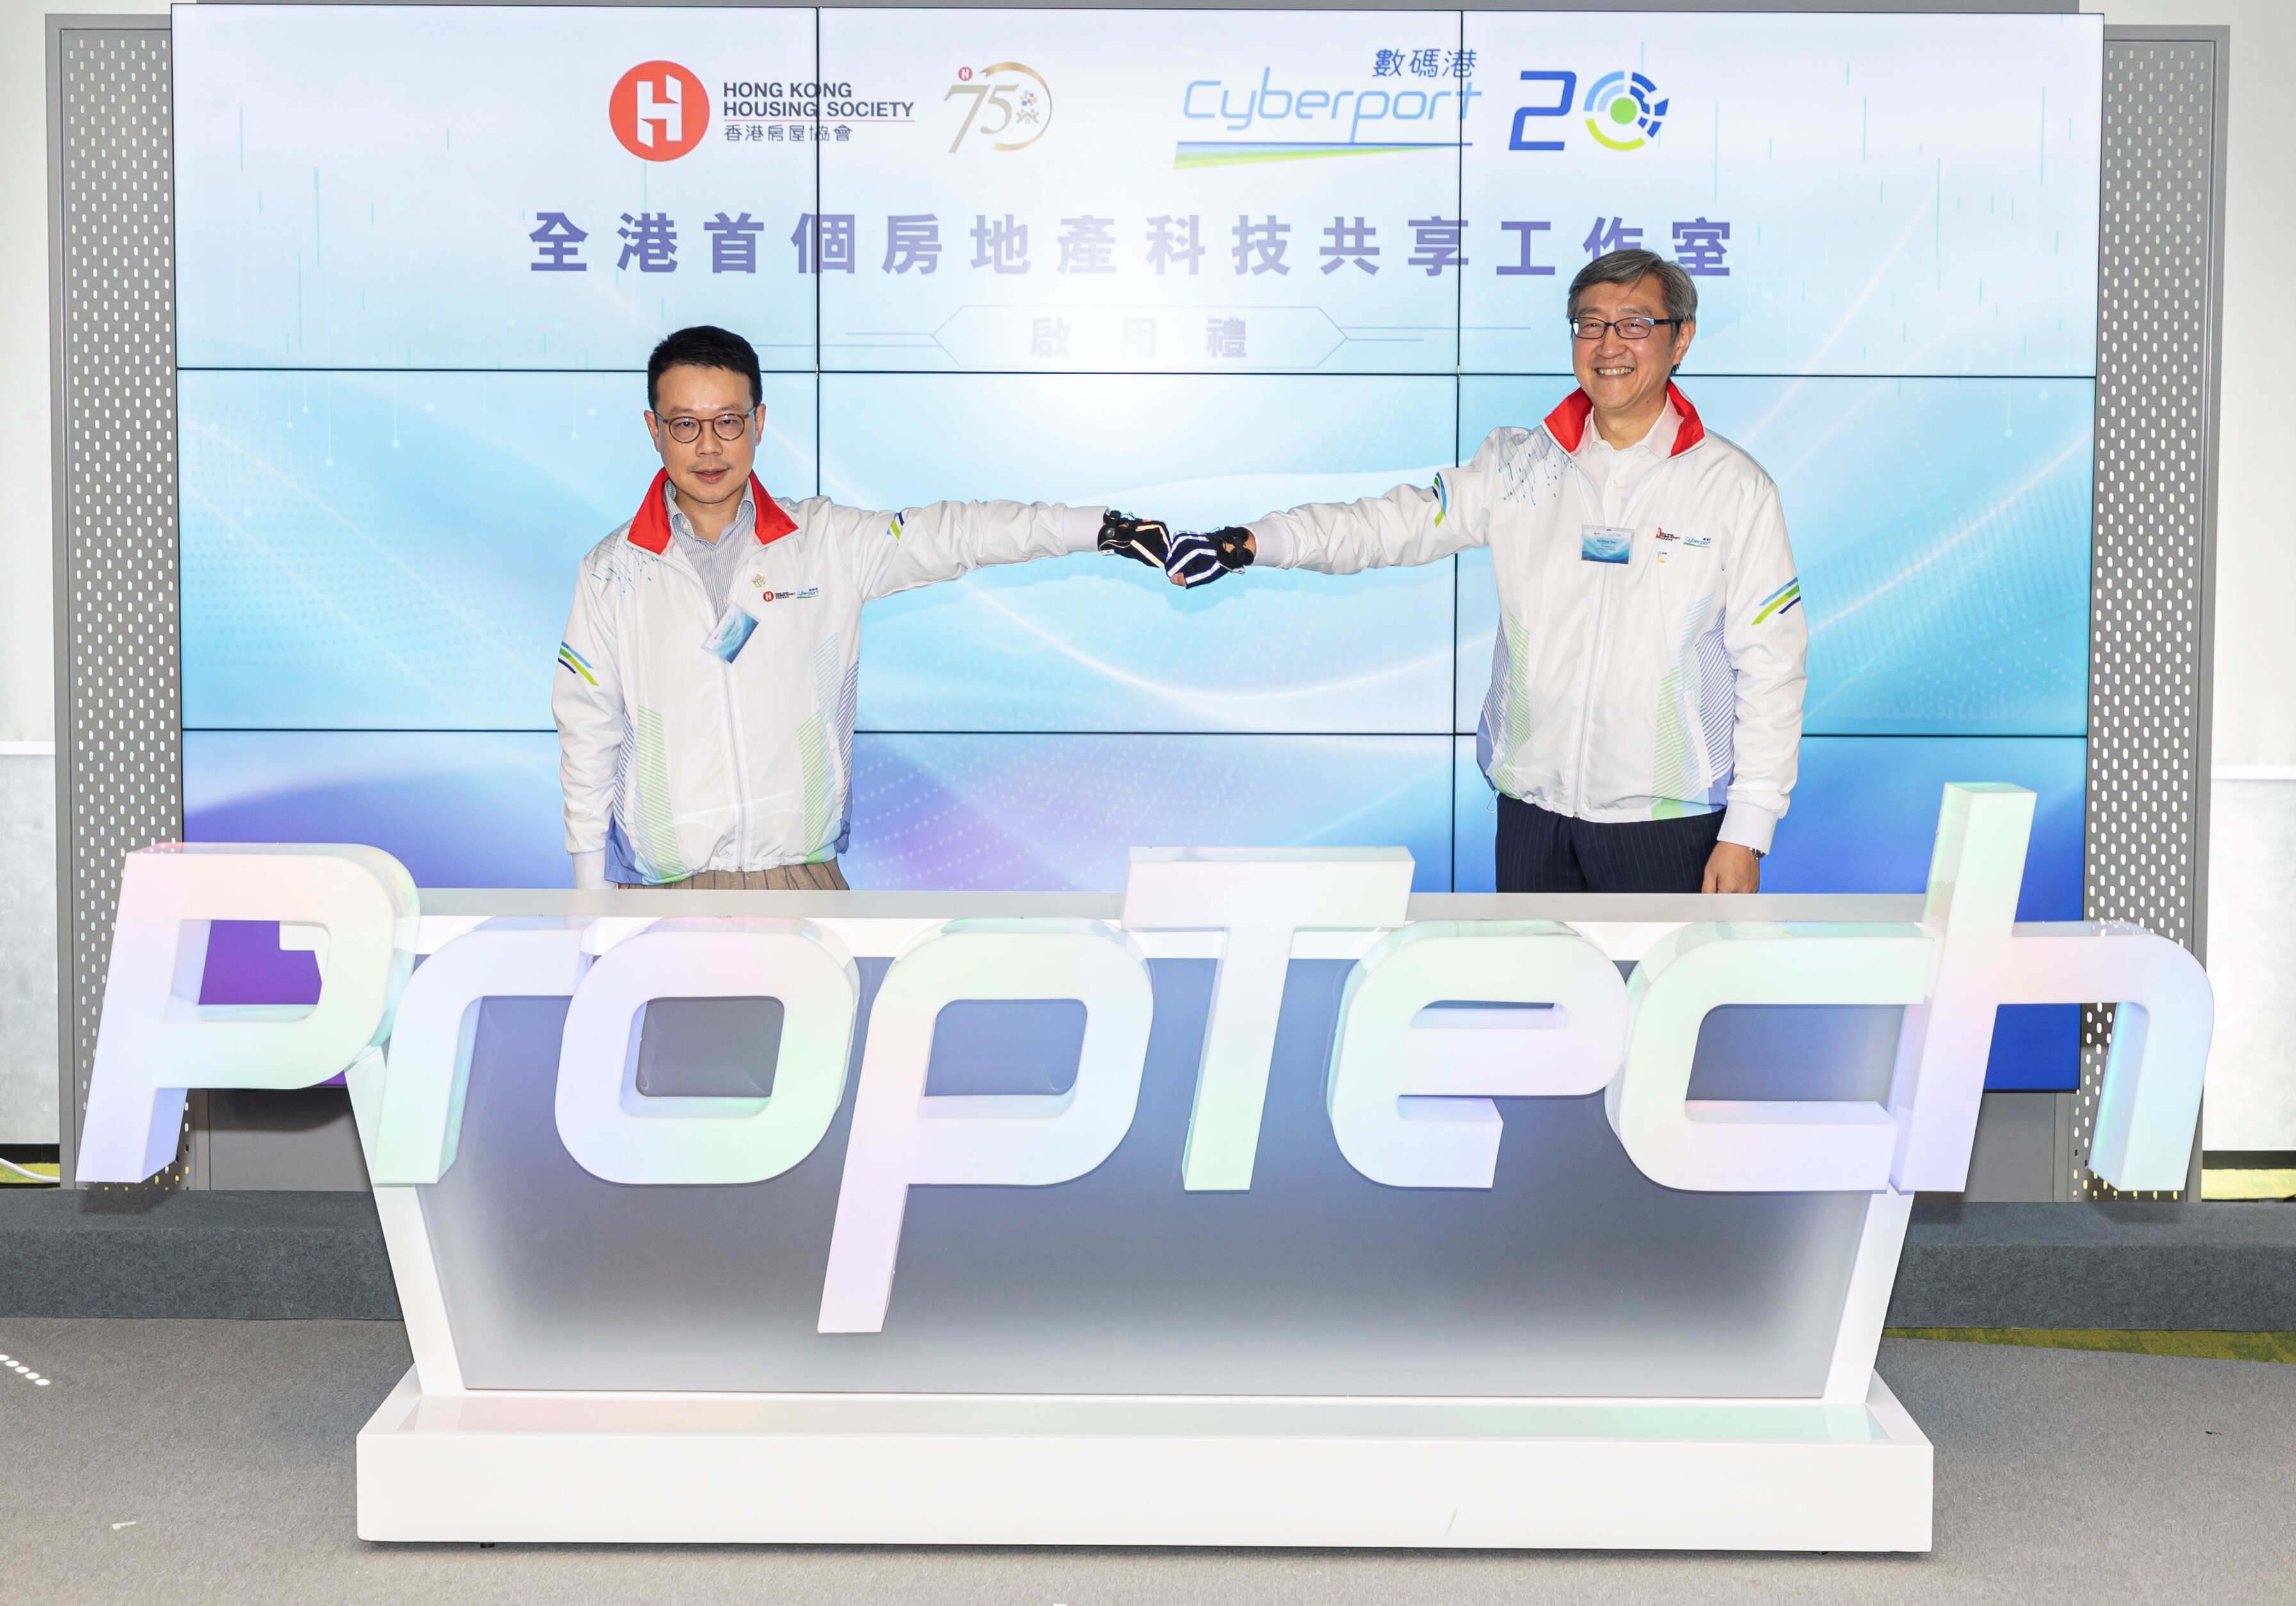 HKHS Chief Executive Officer James Chan (left) and Cyberport Chief Executive Officer Peter Yan (right) officiated at the operations commencement ceremony of Hong Kong's first PropTech co-working space.